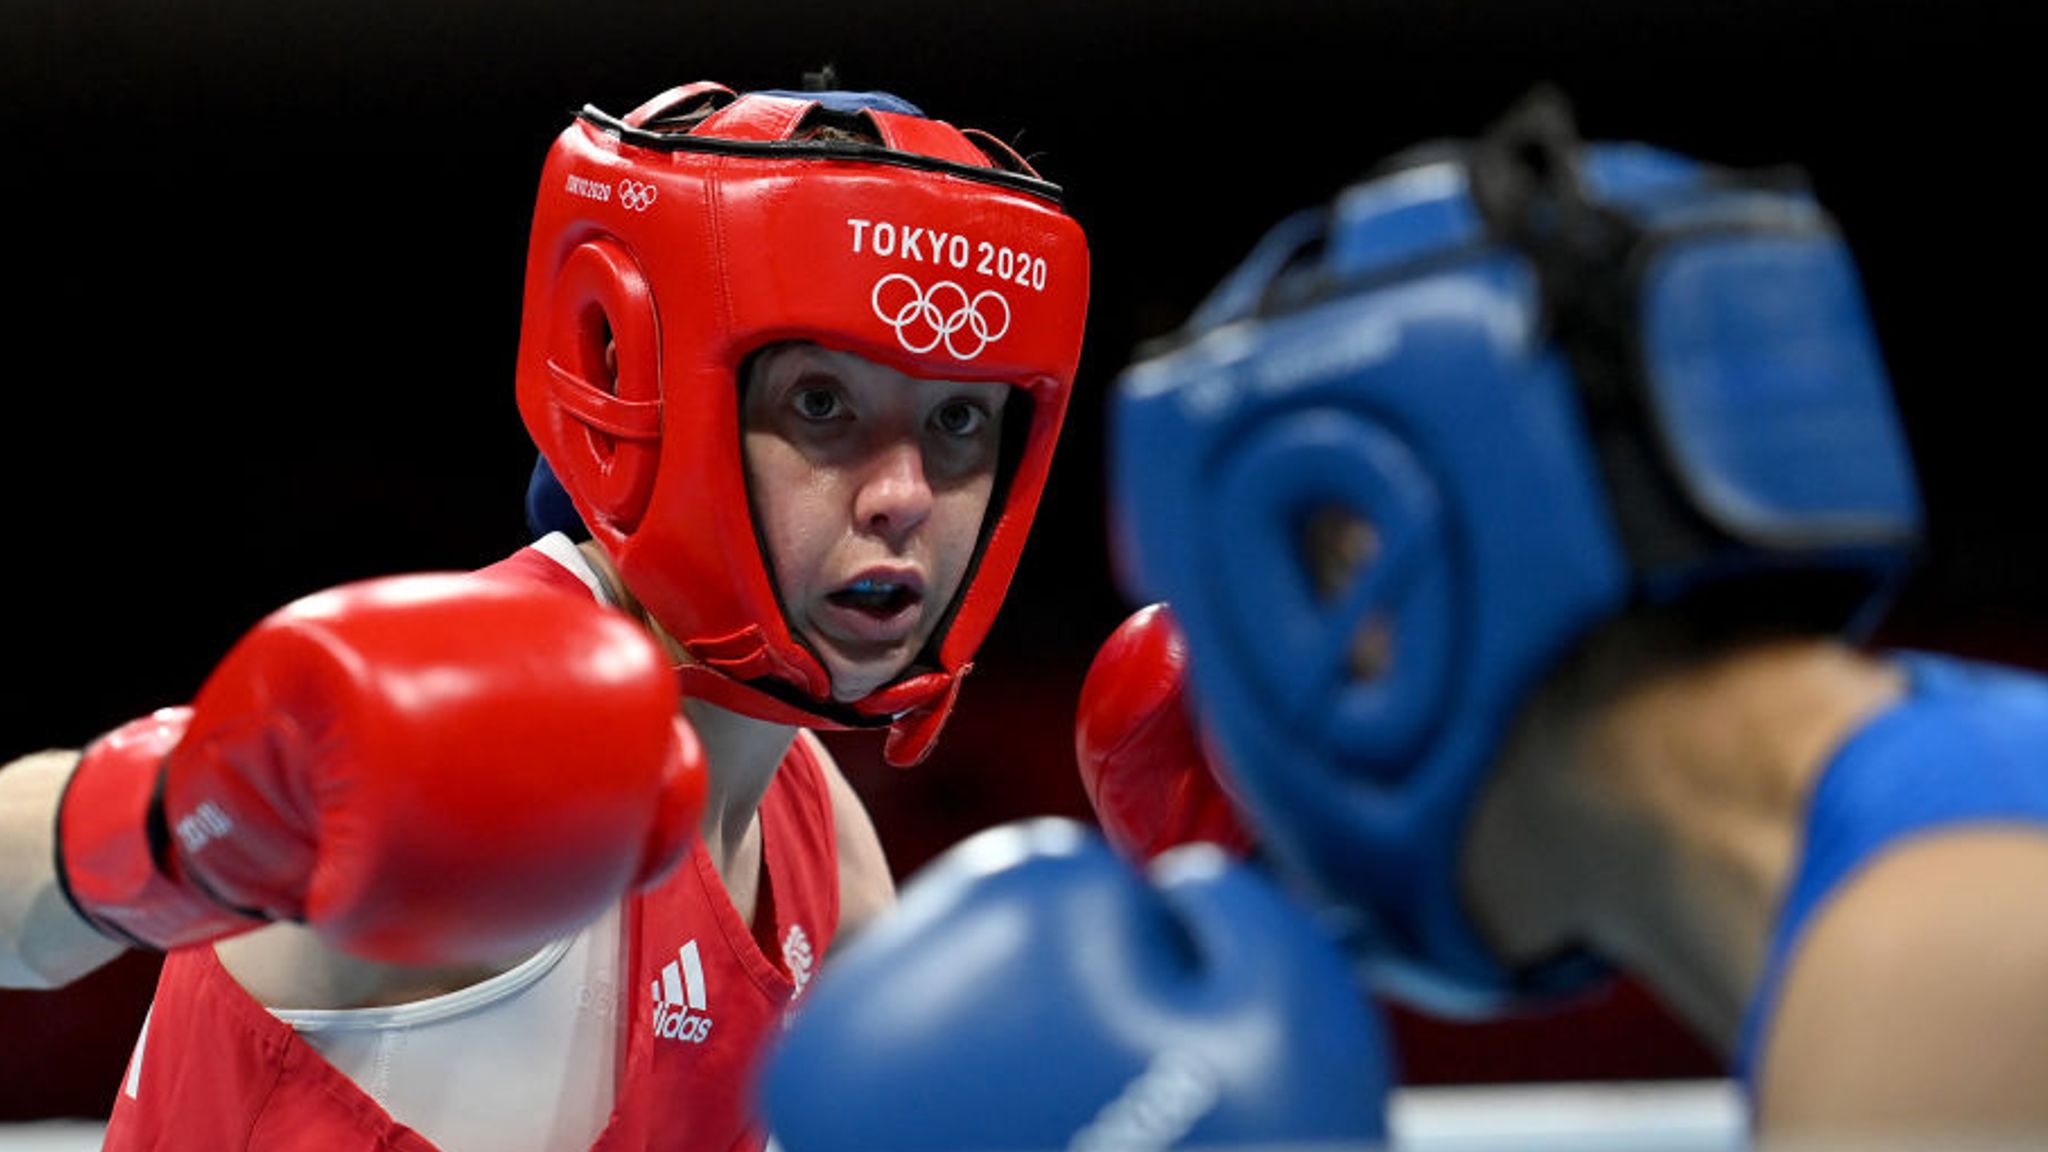 Boxing at the Olympics International Boxing Association set to be